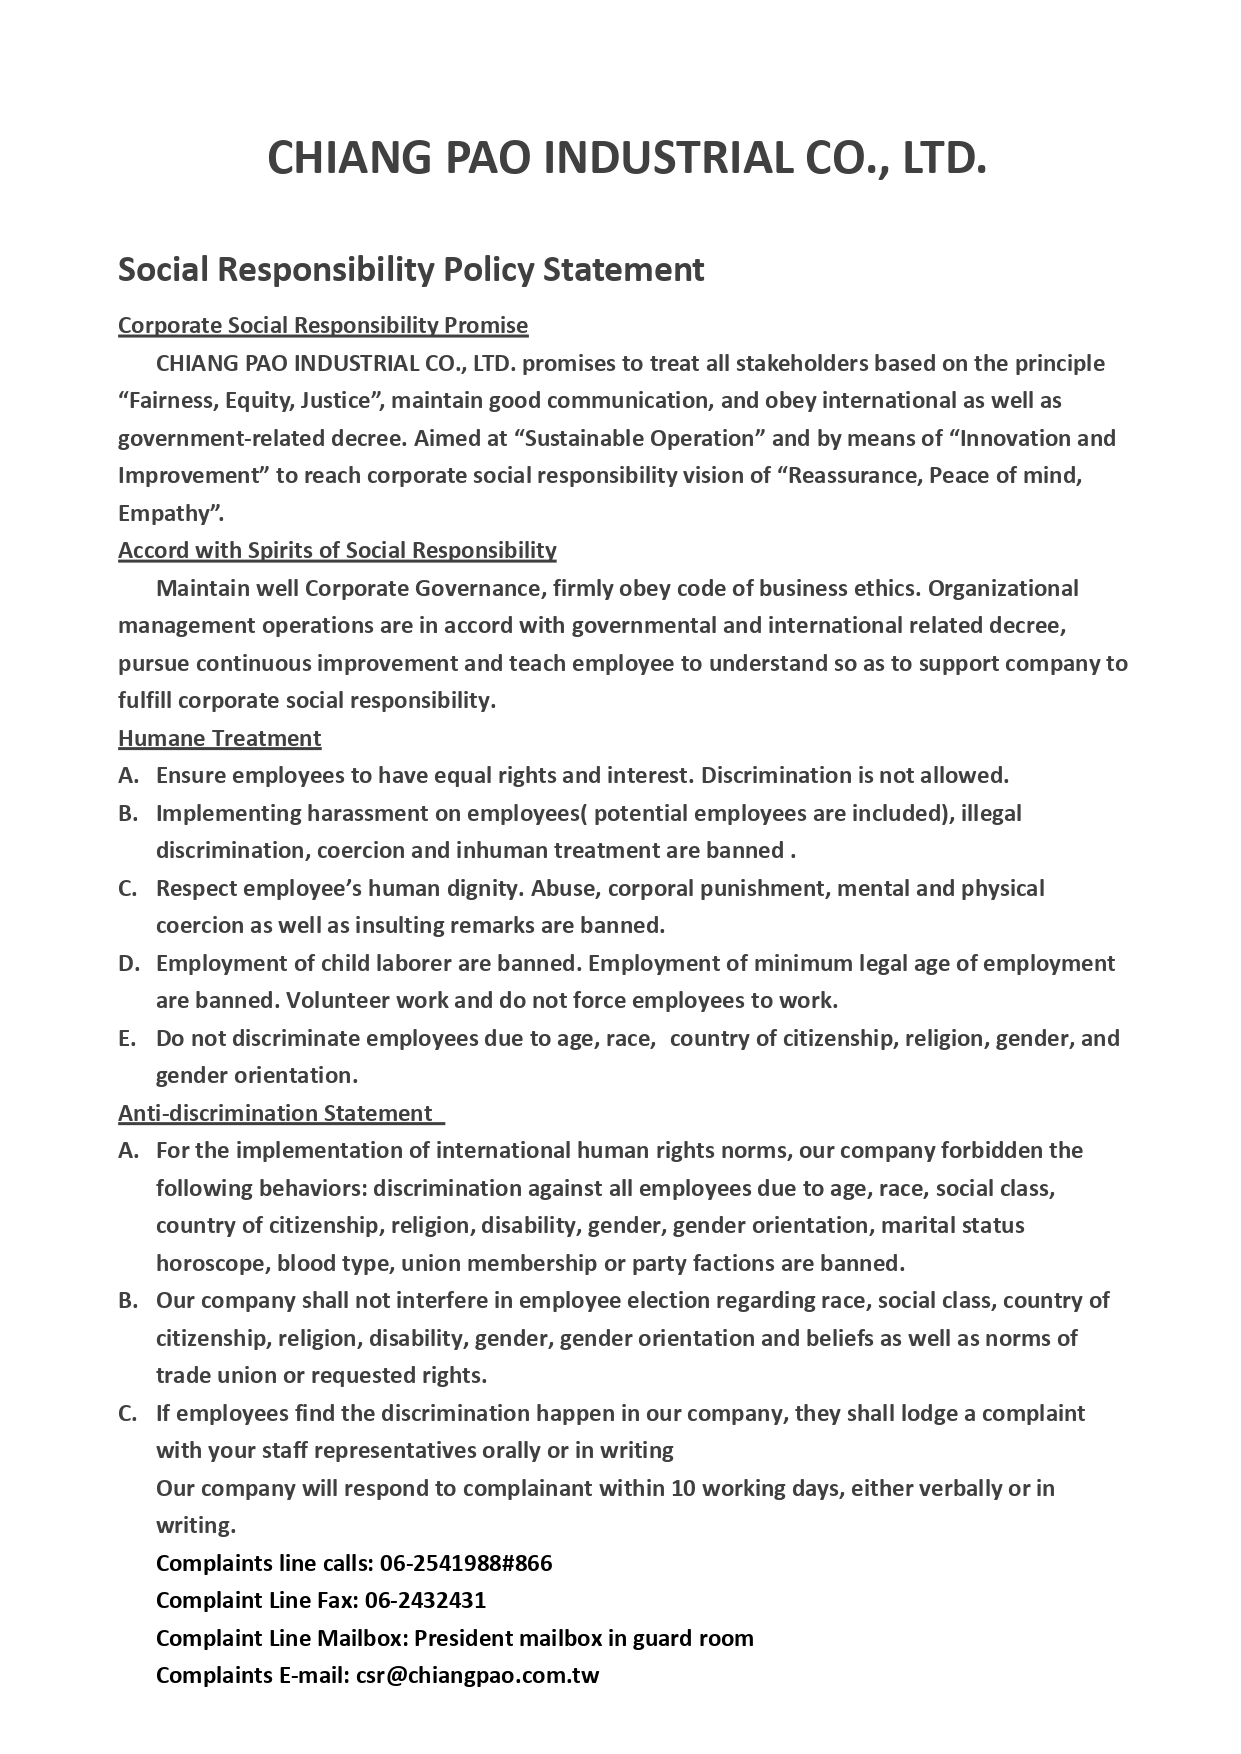 Policy statement